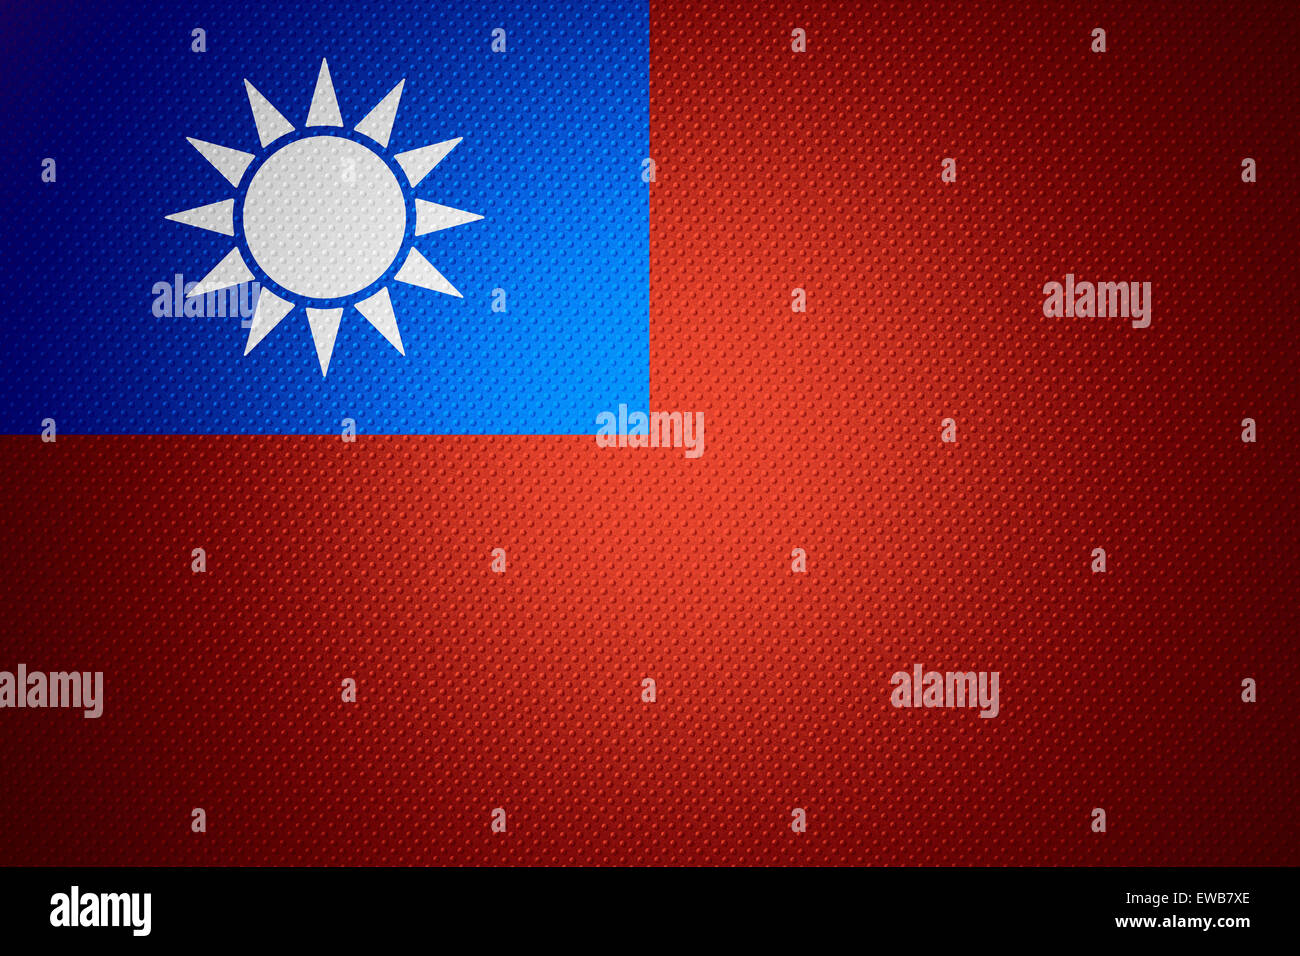 Taiwan flag or Taiwanese banner on abstract texture Stock Photo